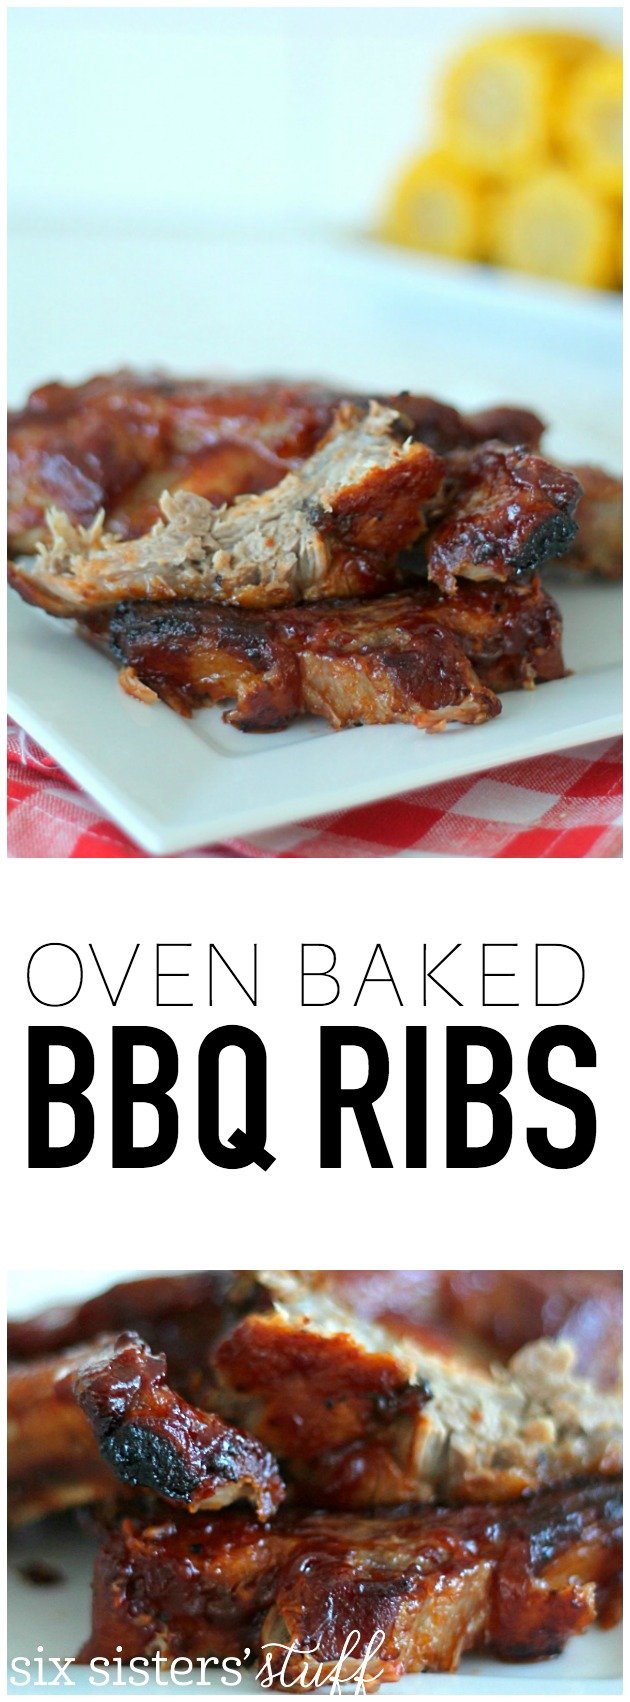 Easy Oven Baked BBQ Ribs Recipe from SixSistersStuff.com